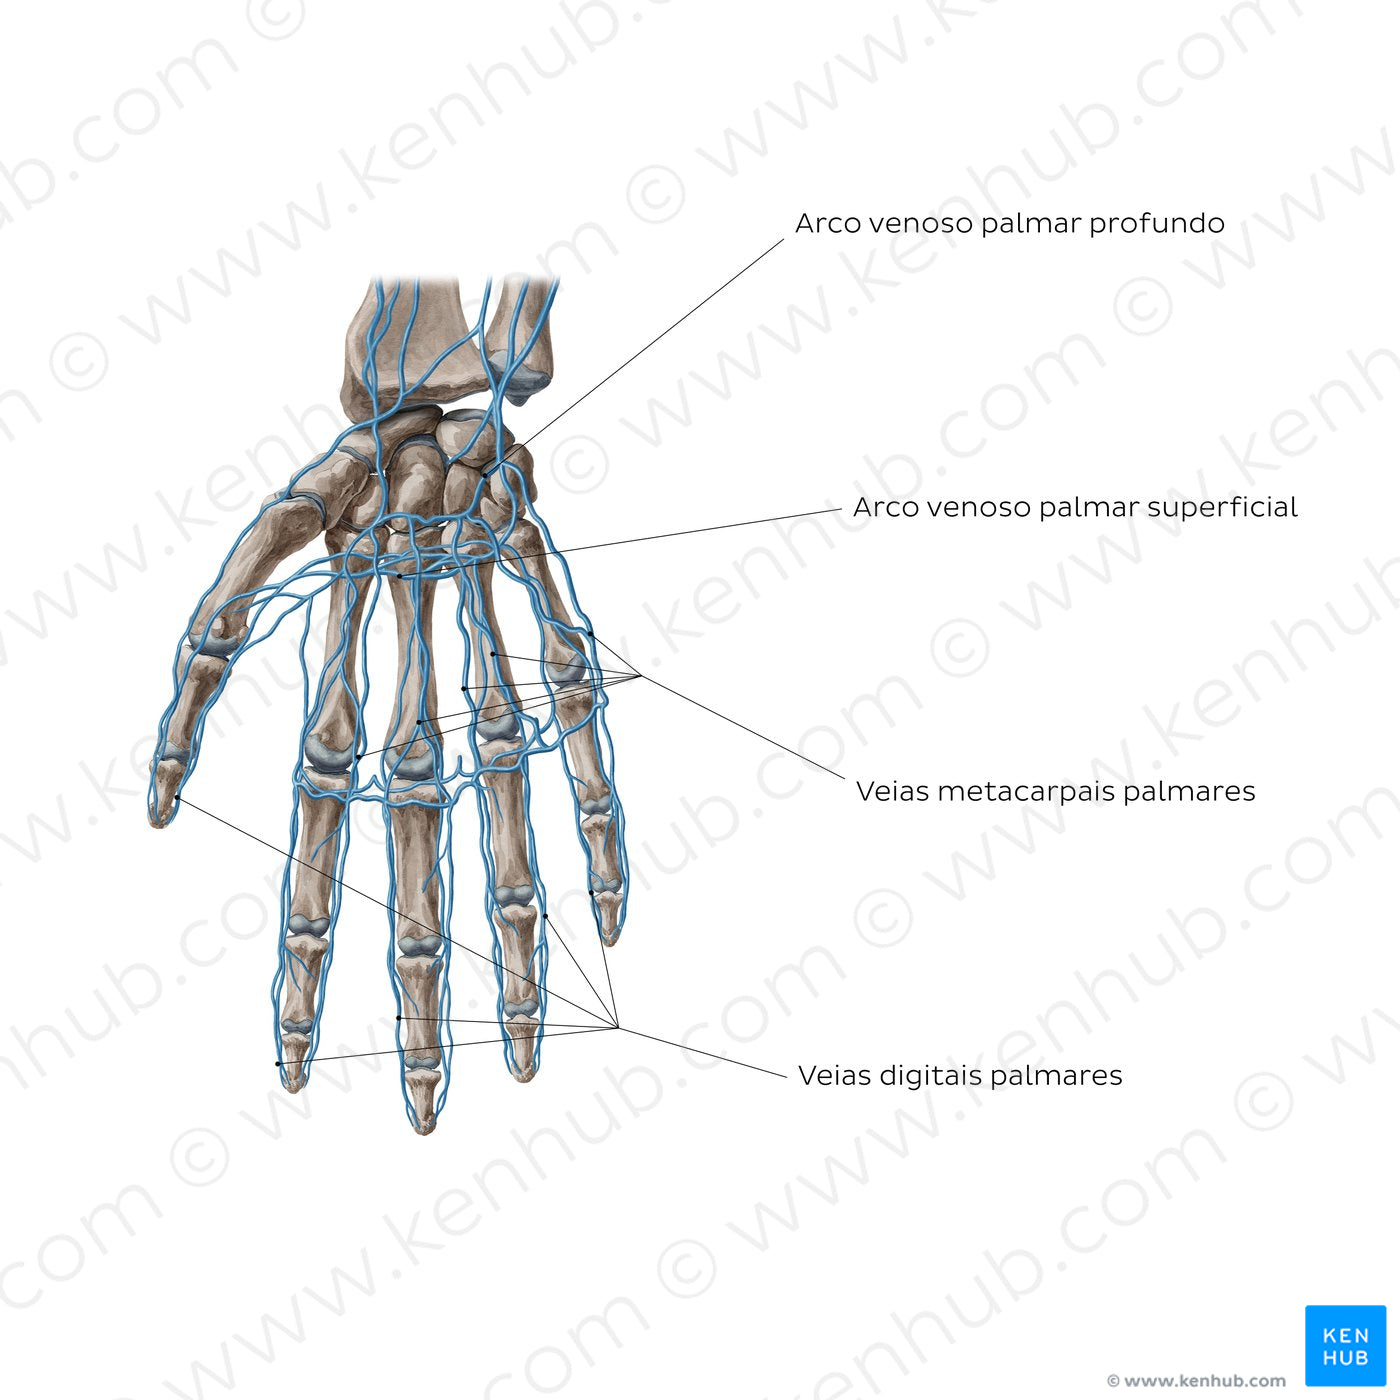 Veins of the hand: Palmar view (Portuguese)